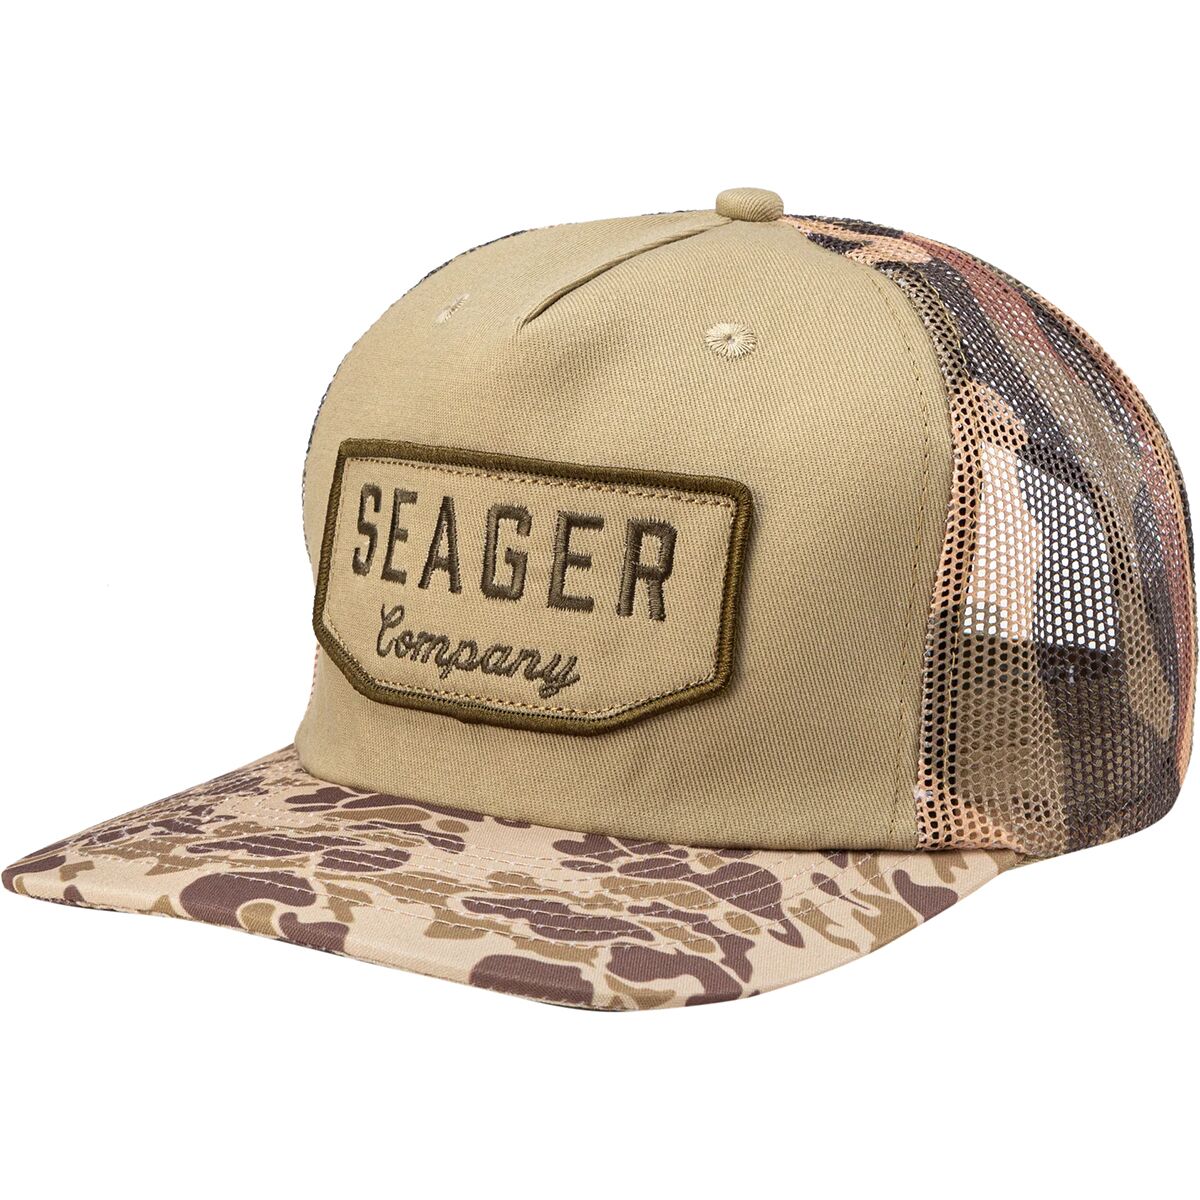 Seager Co. Wilson Snapback